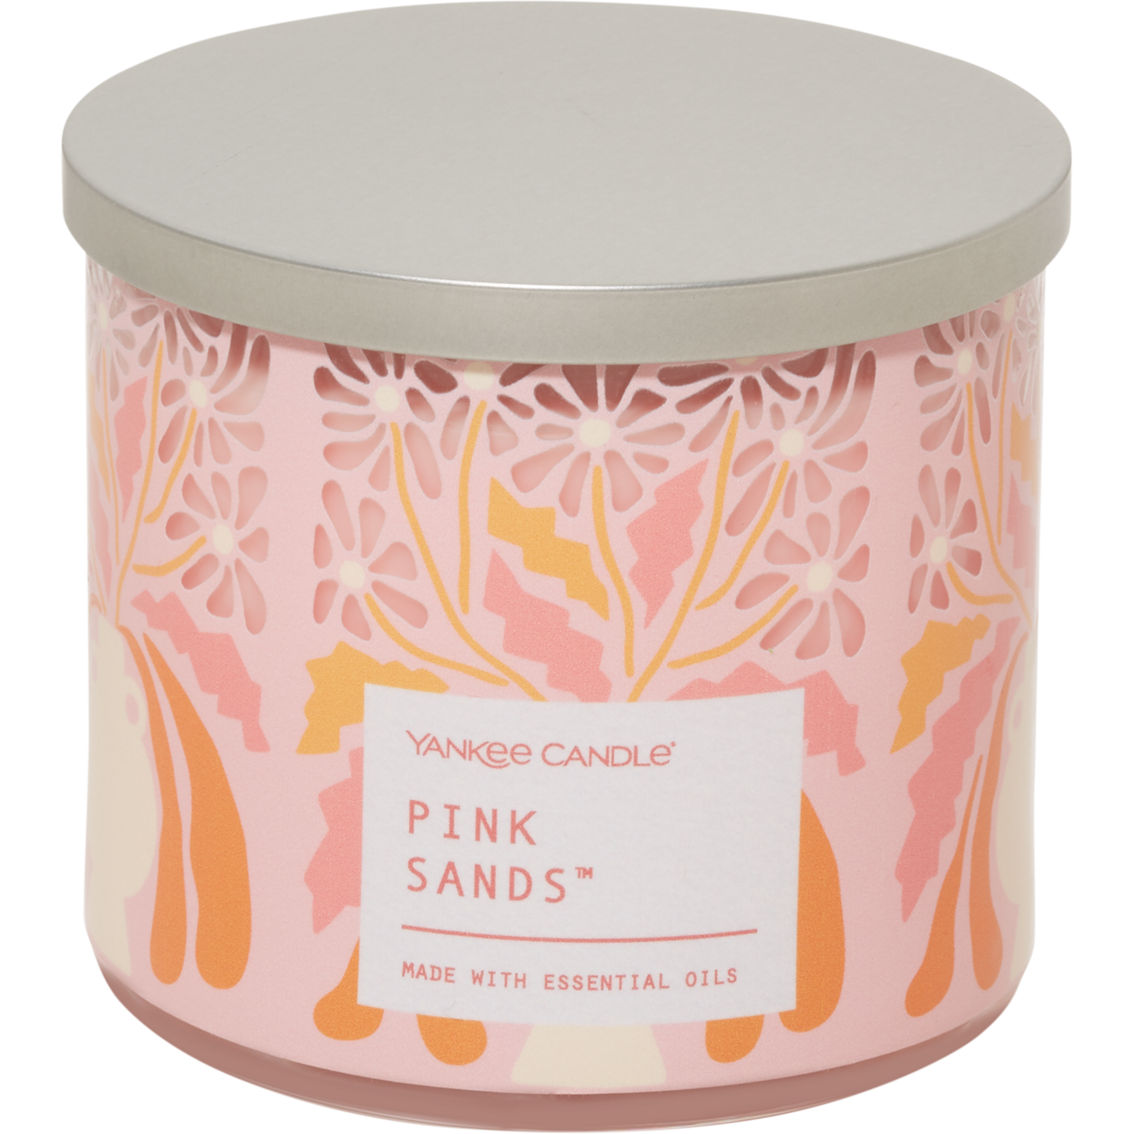 Yankee Candle Pink Sands 3-Wick Candle - Image 2 of 2